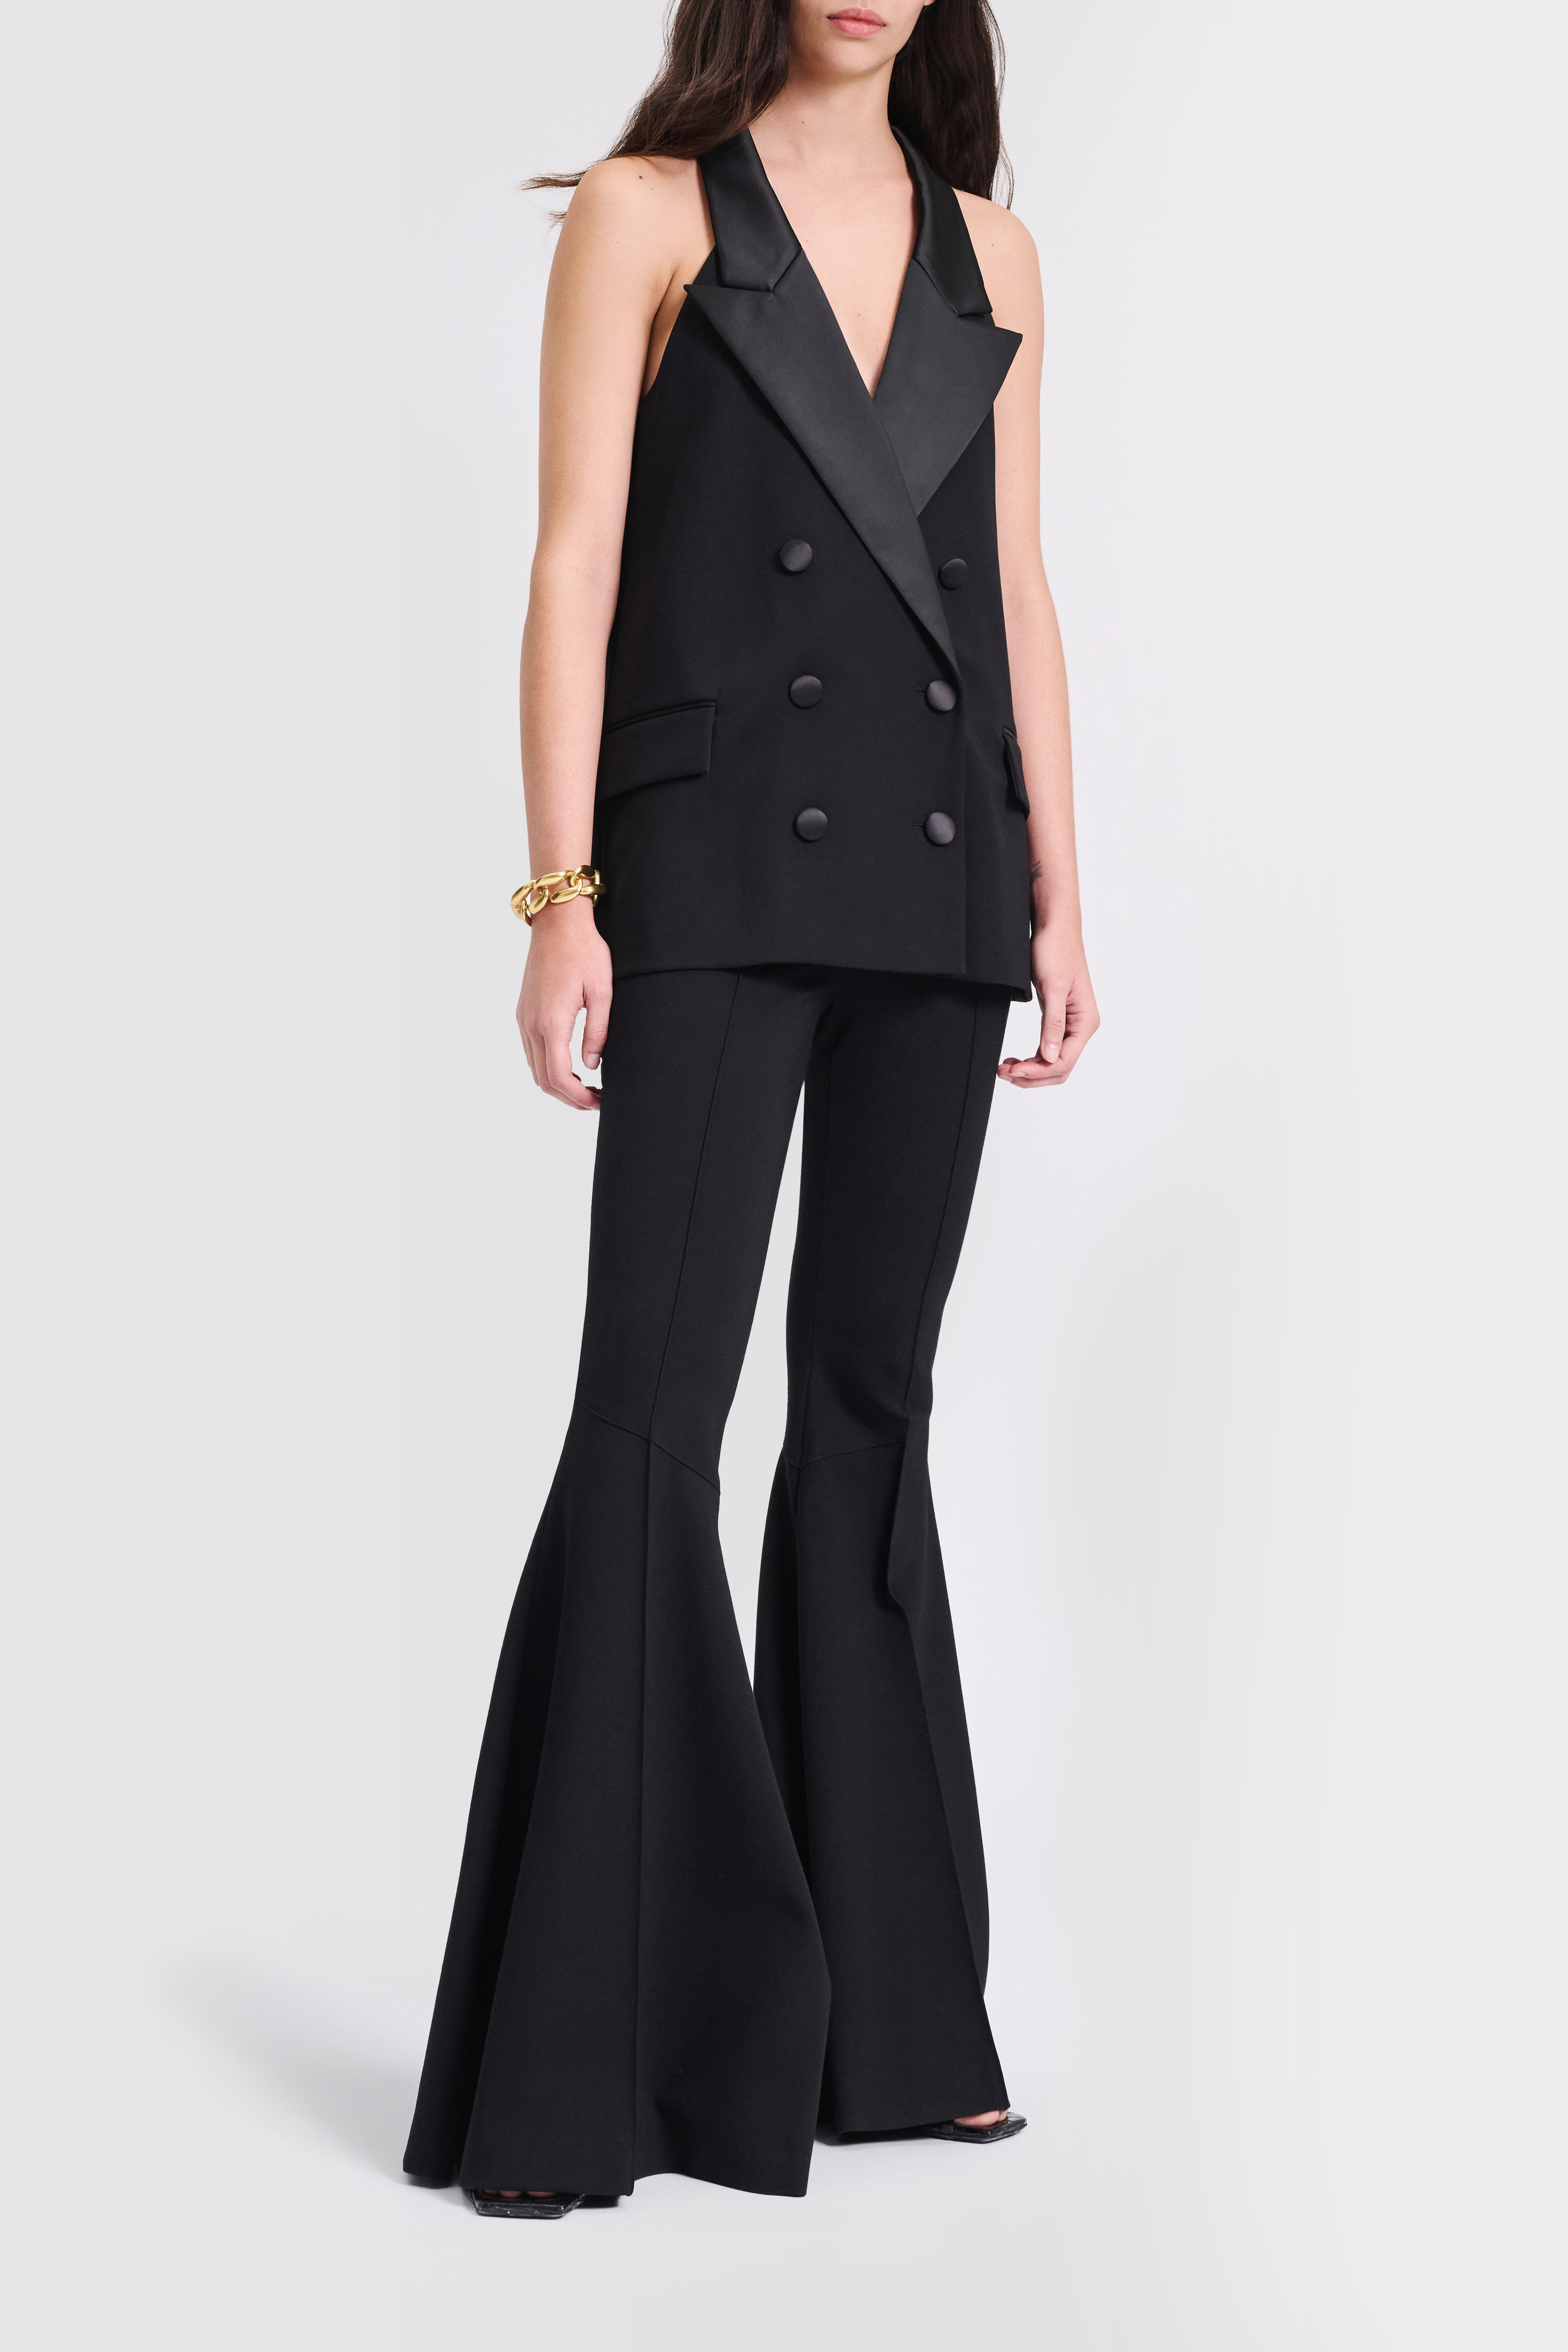 Dorothee Schumacher Double-breasted tuxedo-style